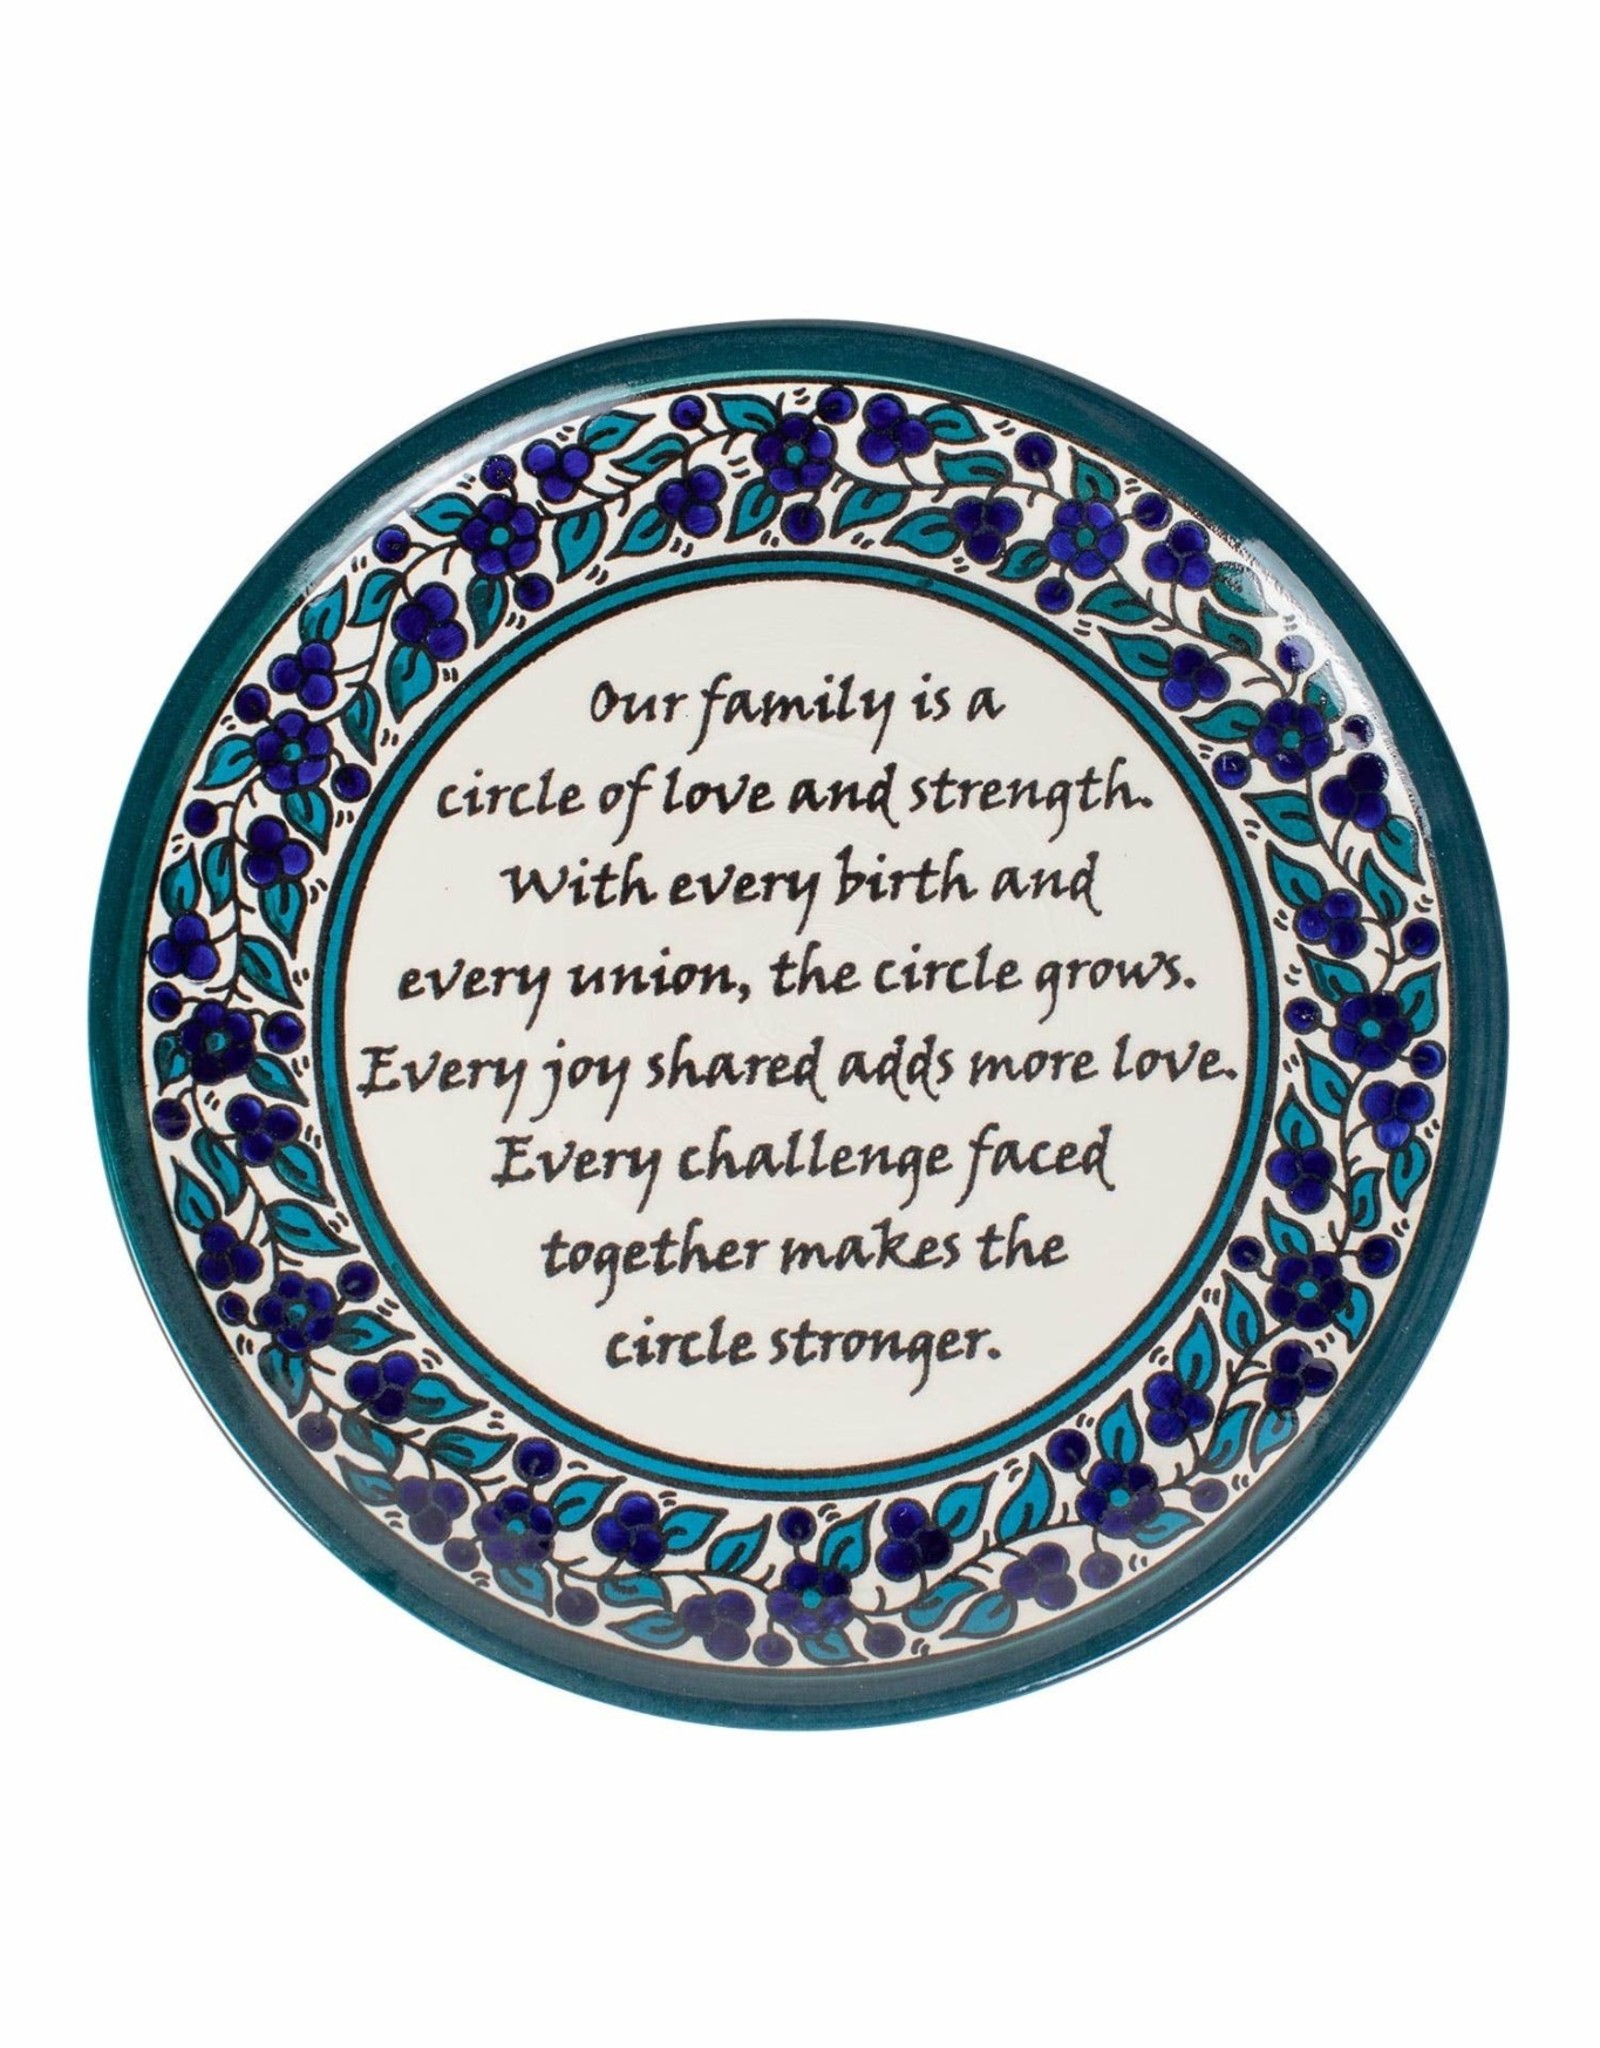 Ten Thousand Villages Family Circle Plate